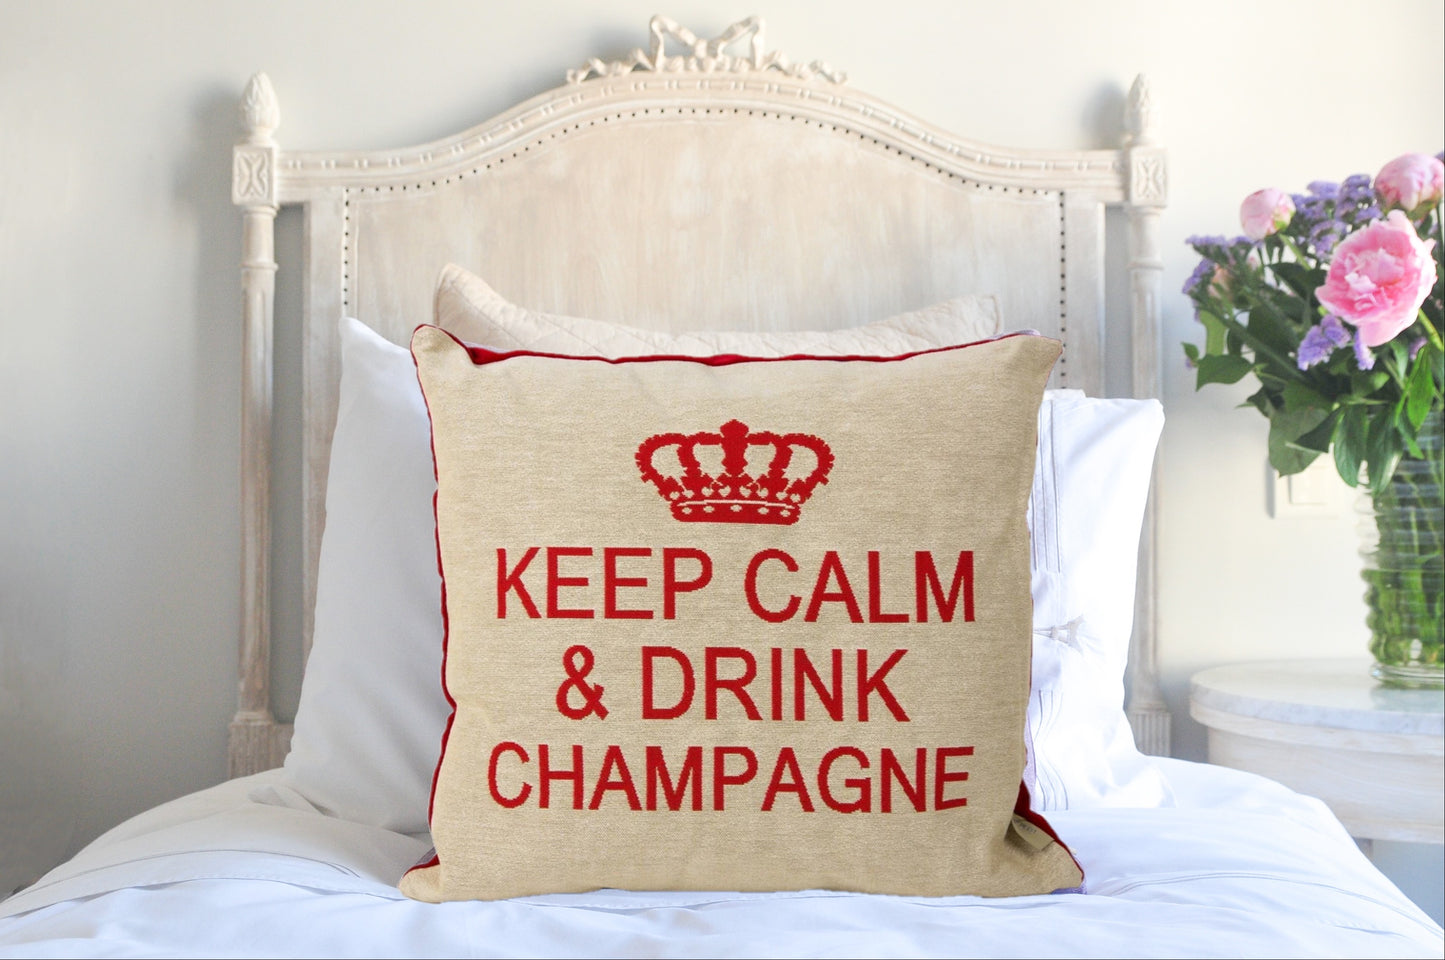 Keep Calm and Drink Champagne Decorative Pillow Cover - (Cream and Red)